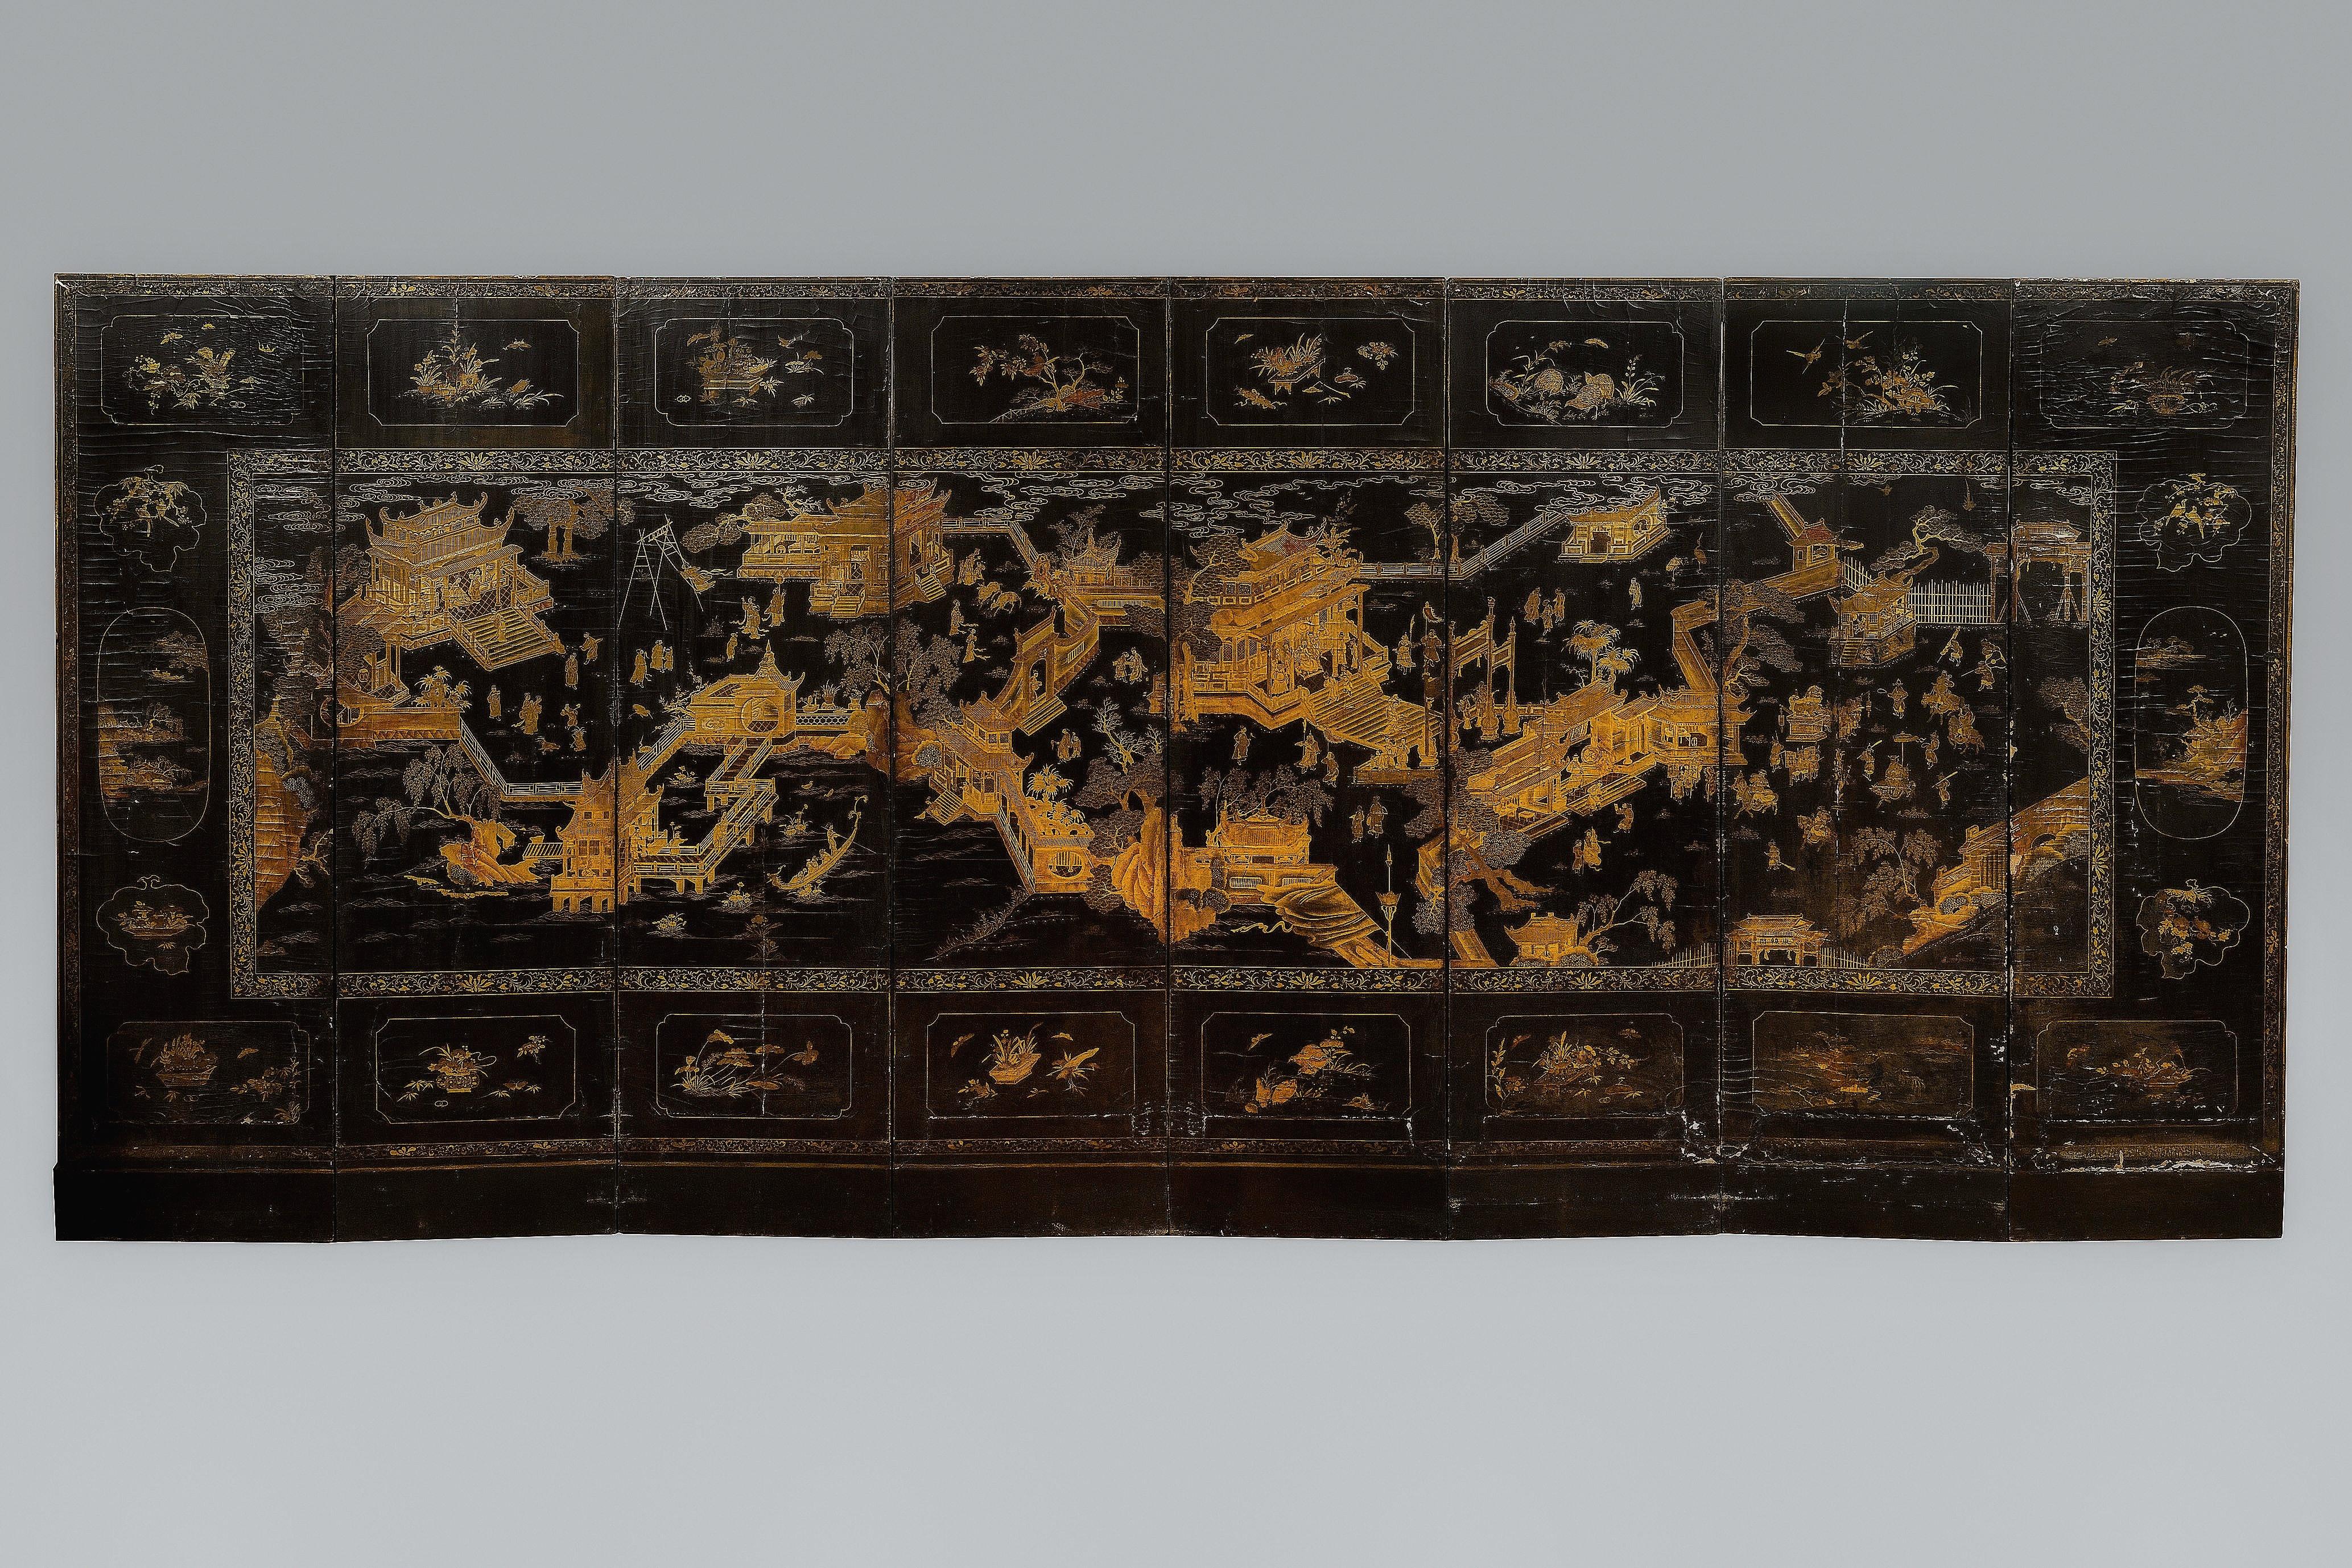 Large 8-wing-screen in Coromandel Lacquer, China, Quing, Late 18th/Early 19th In Good Condition For Sale In Walkertshofen, BY